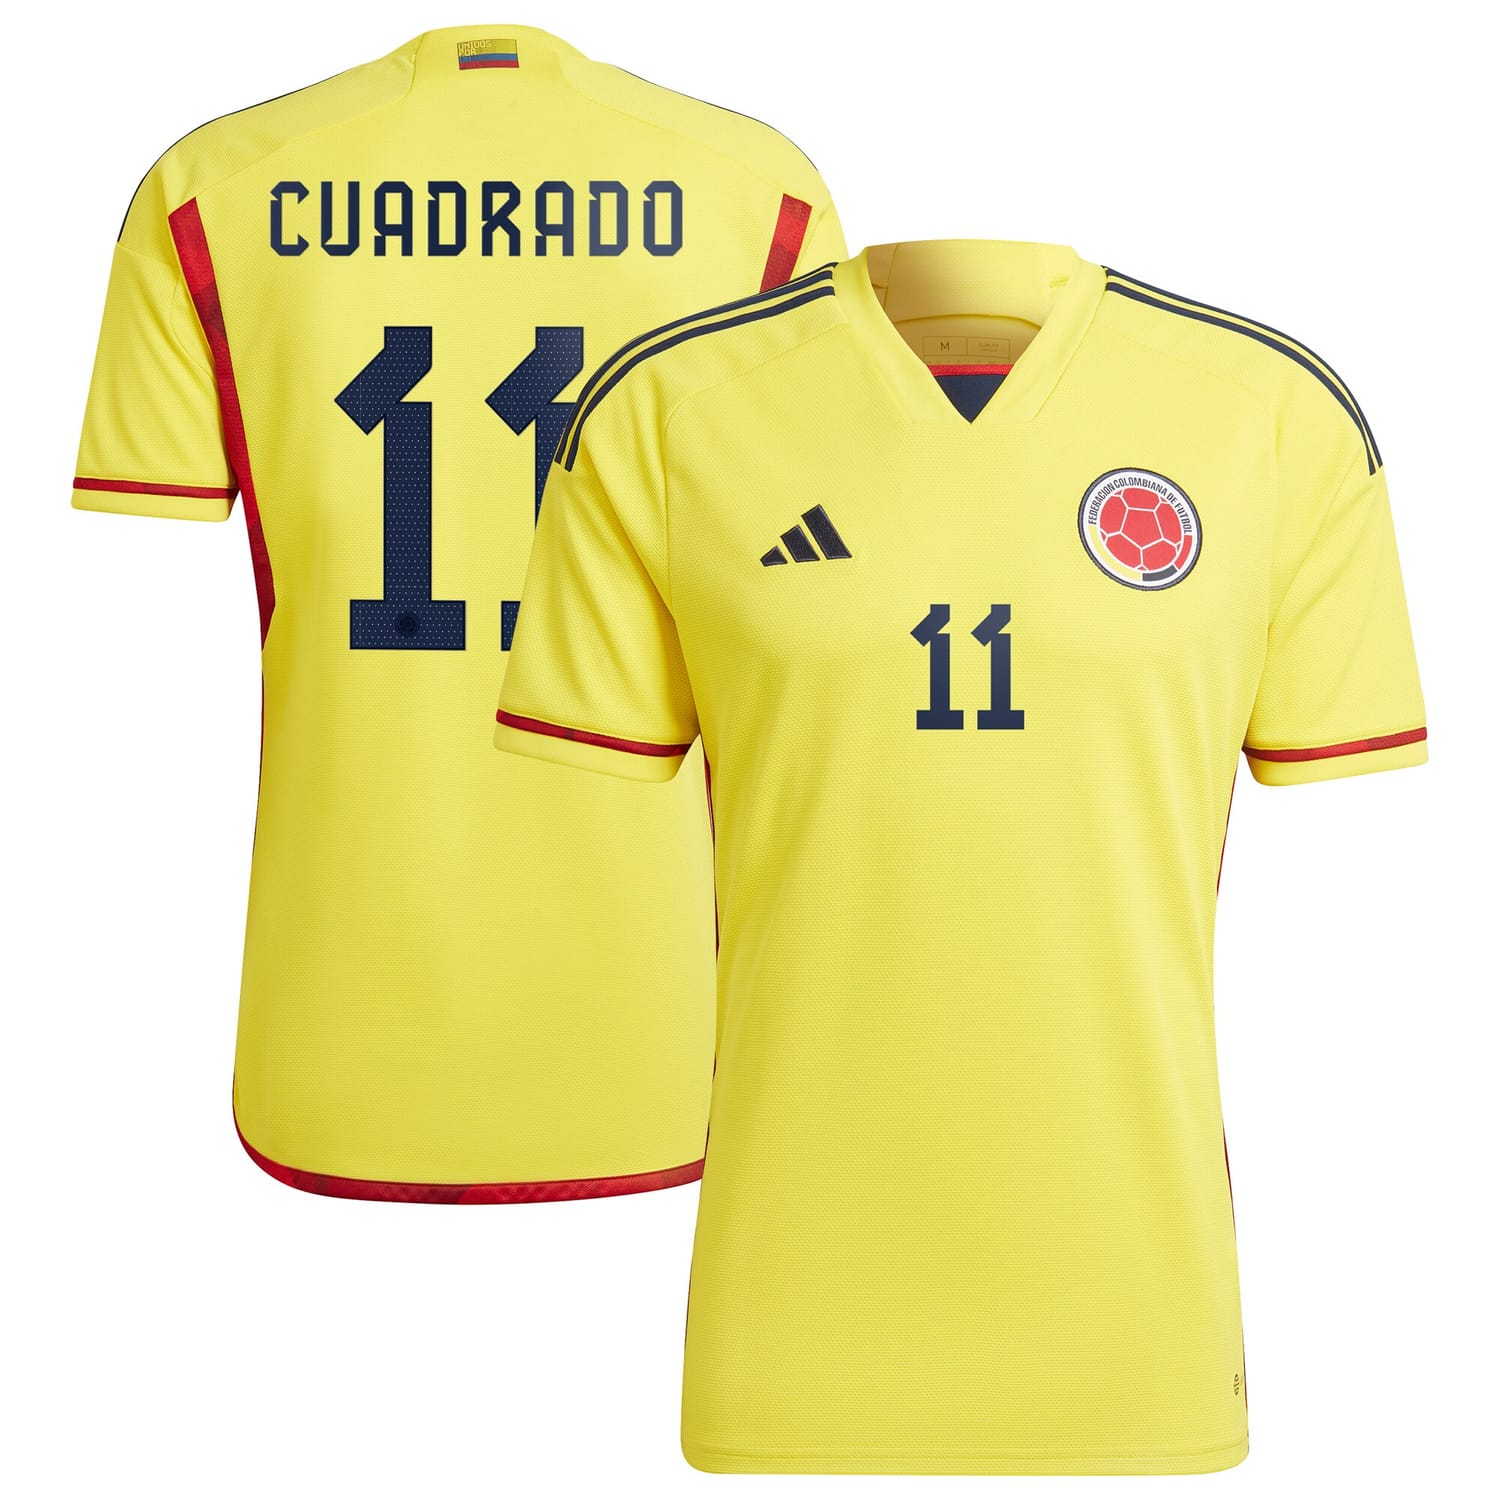 Colombia National Team Home Jersey Shirt Yellow 2022-23 player Juan Cuadrado printing for Men